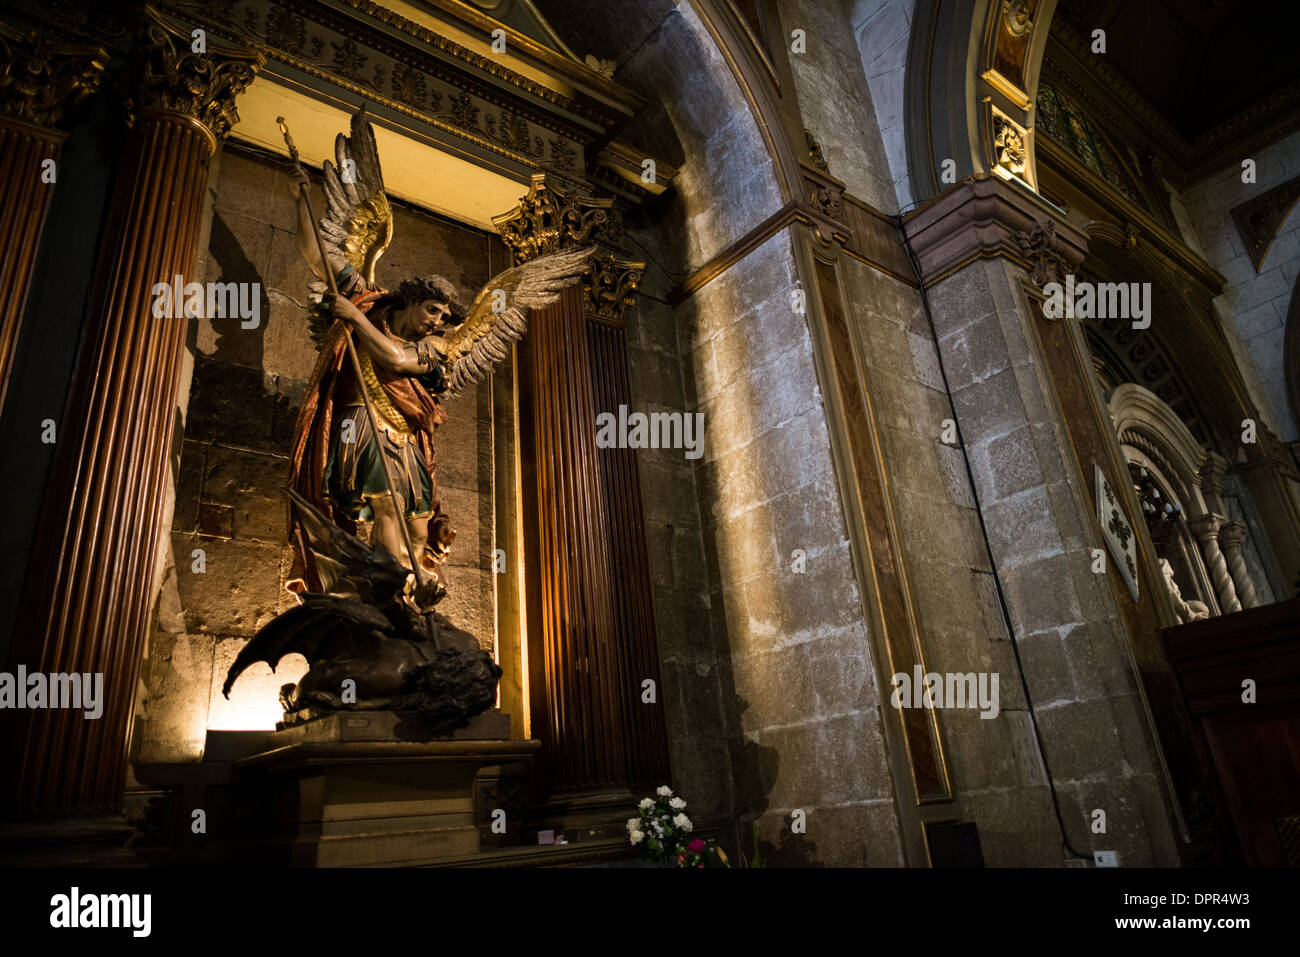 SANTIAGO, Chile - Statue in the Metropolitan Cathedral of Santiago (Catedral Metropolitana de Santiago) in the heart of Santiago, Chile, facing Plaza de Armas. The original cathedral was constructed during the period 1748 to 1800 (with subsequent alterations) of a neoclassical design. Stock Photo